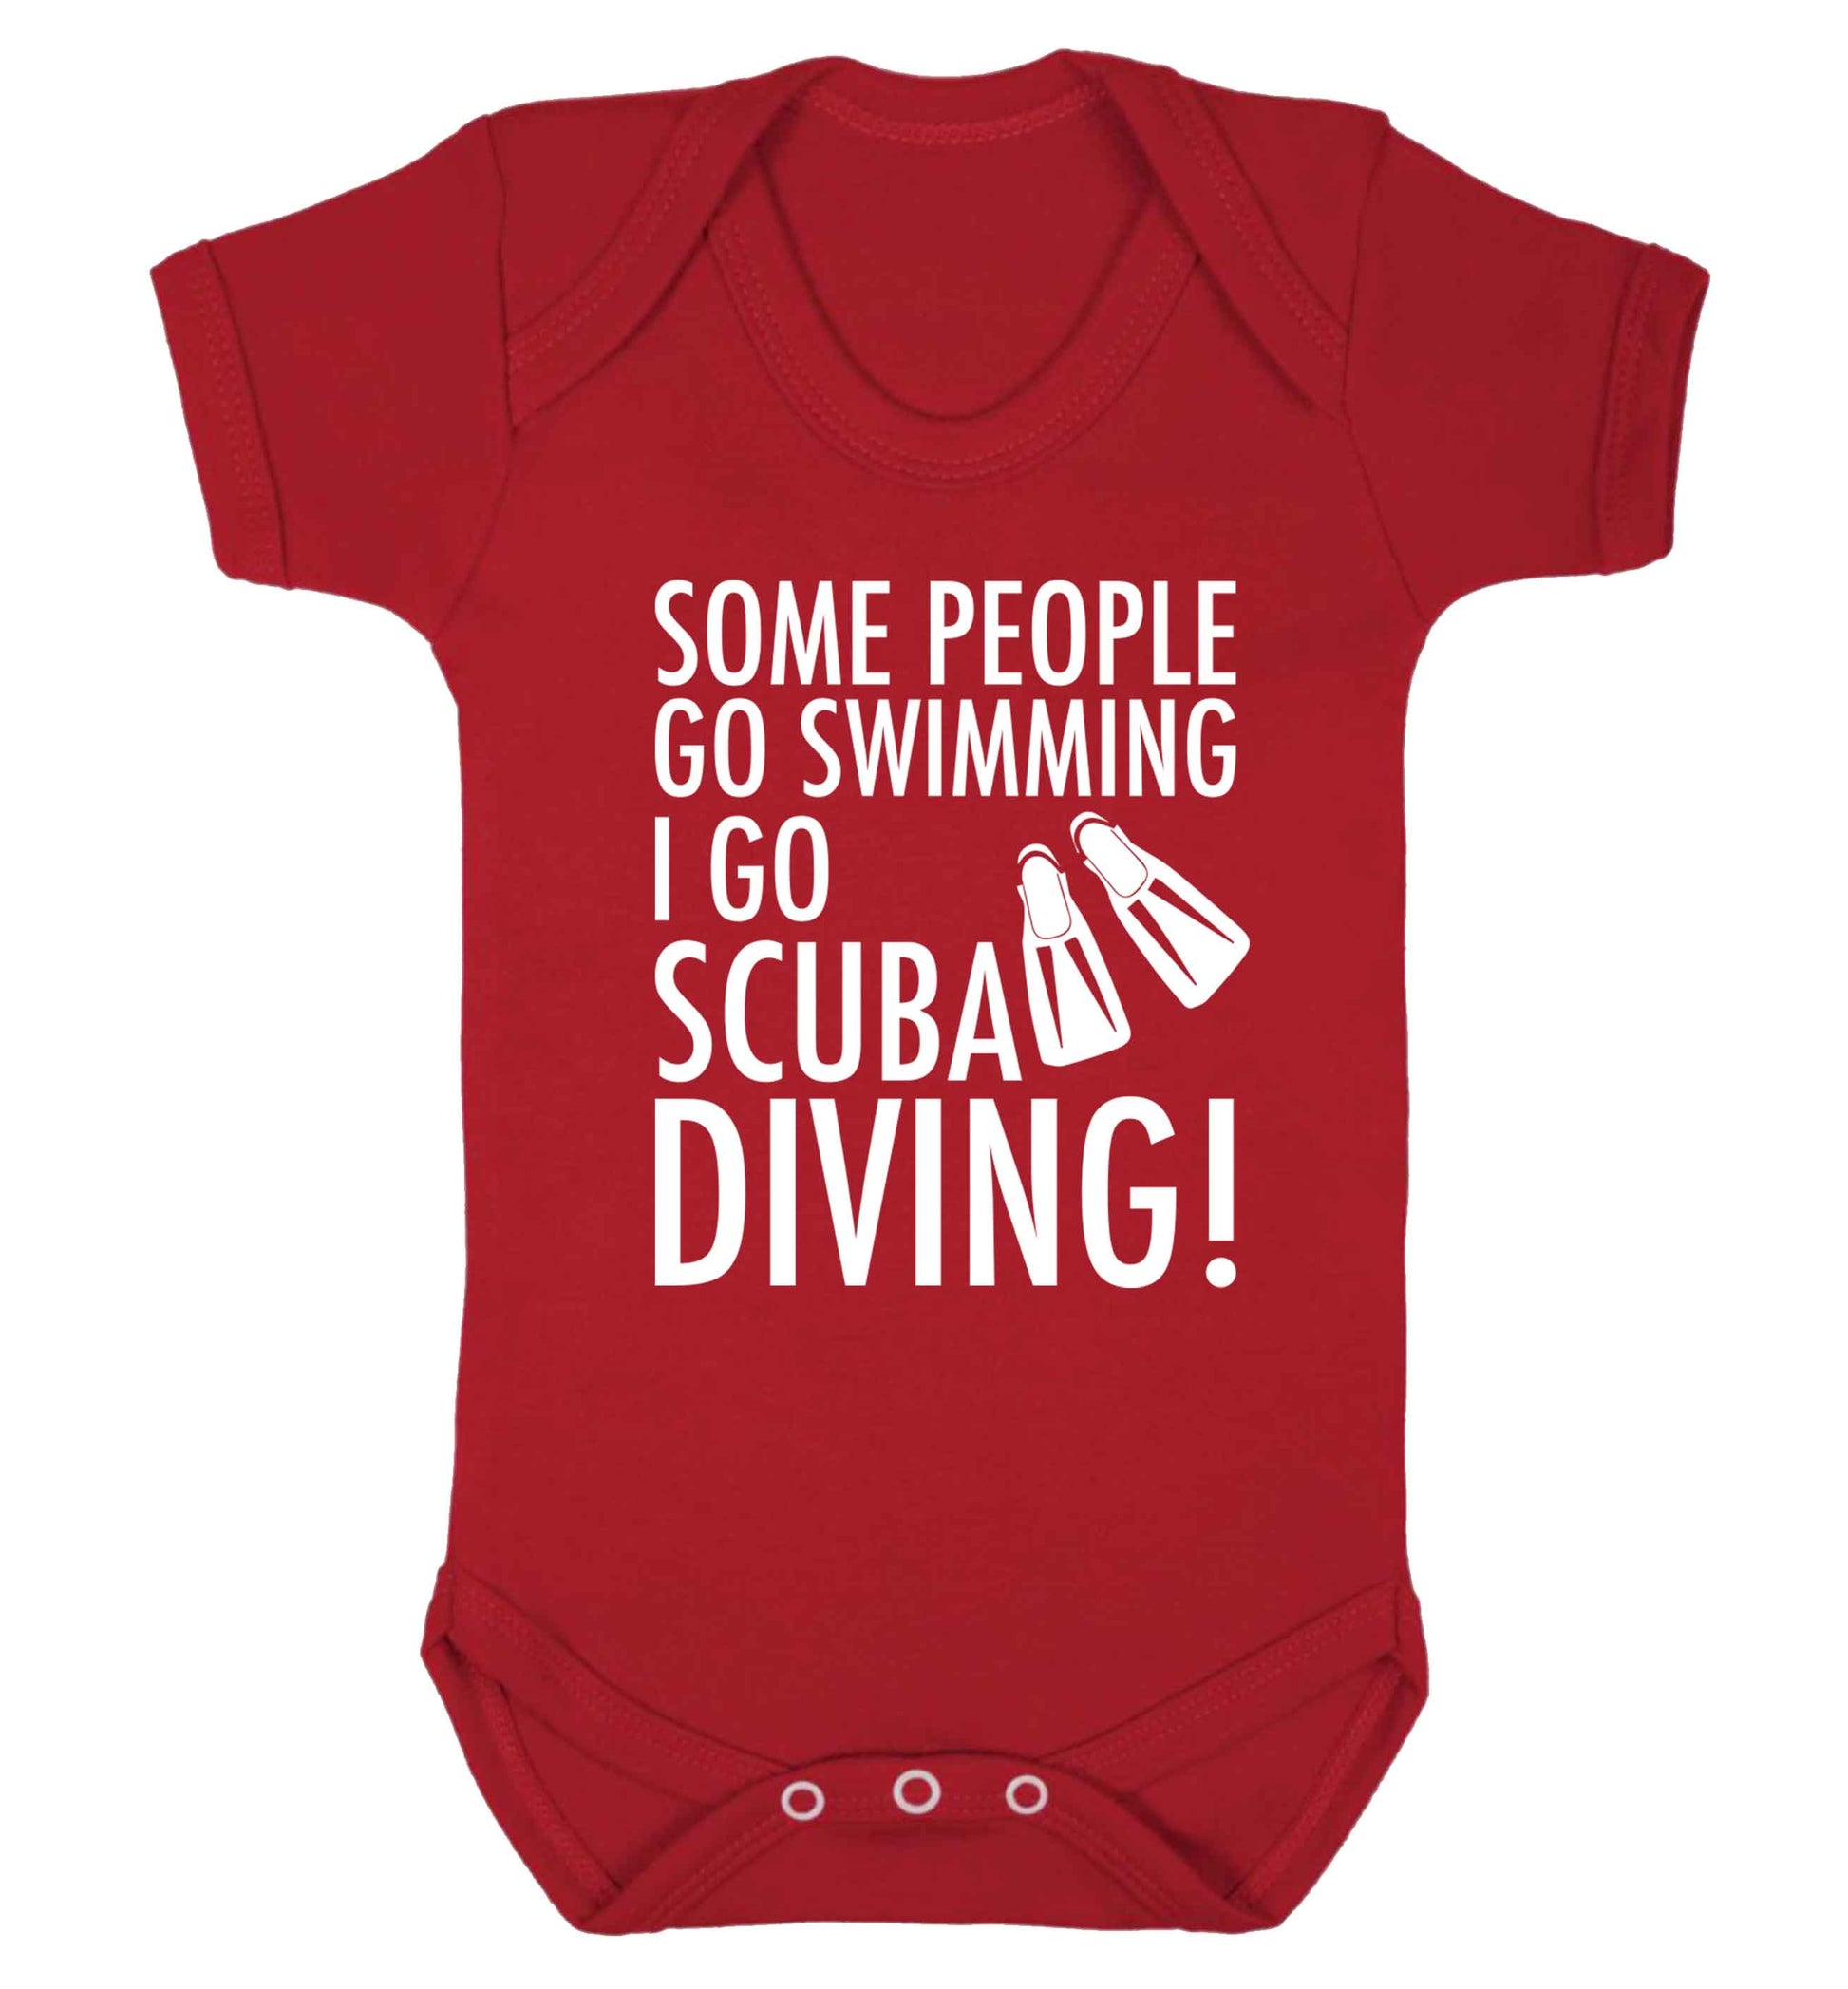 Some people go swimming I go scuba diving! Baby Vest red 18-24 months